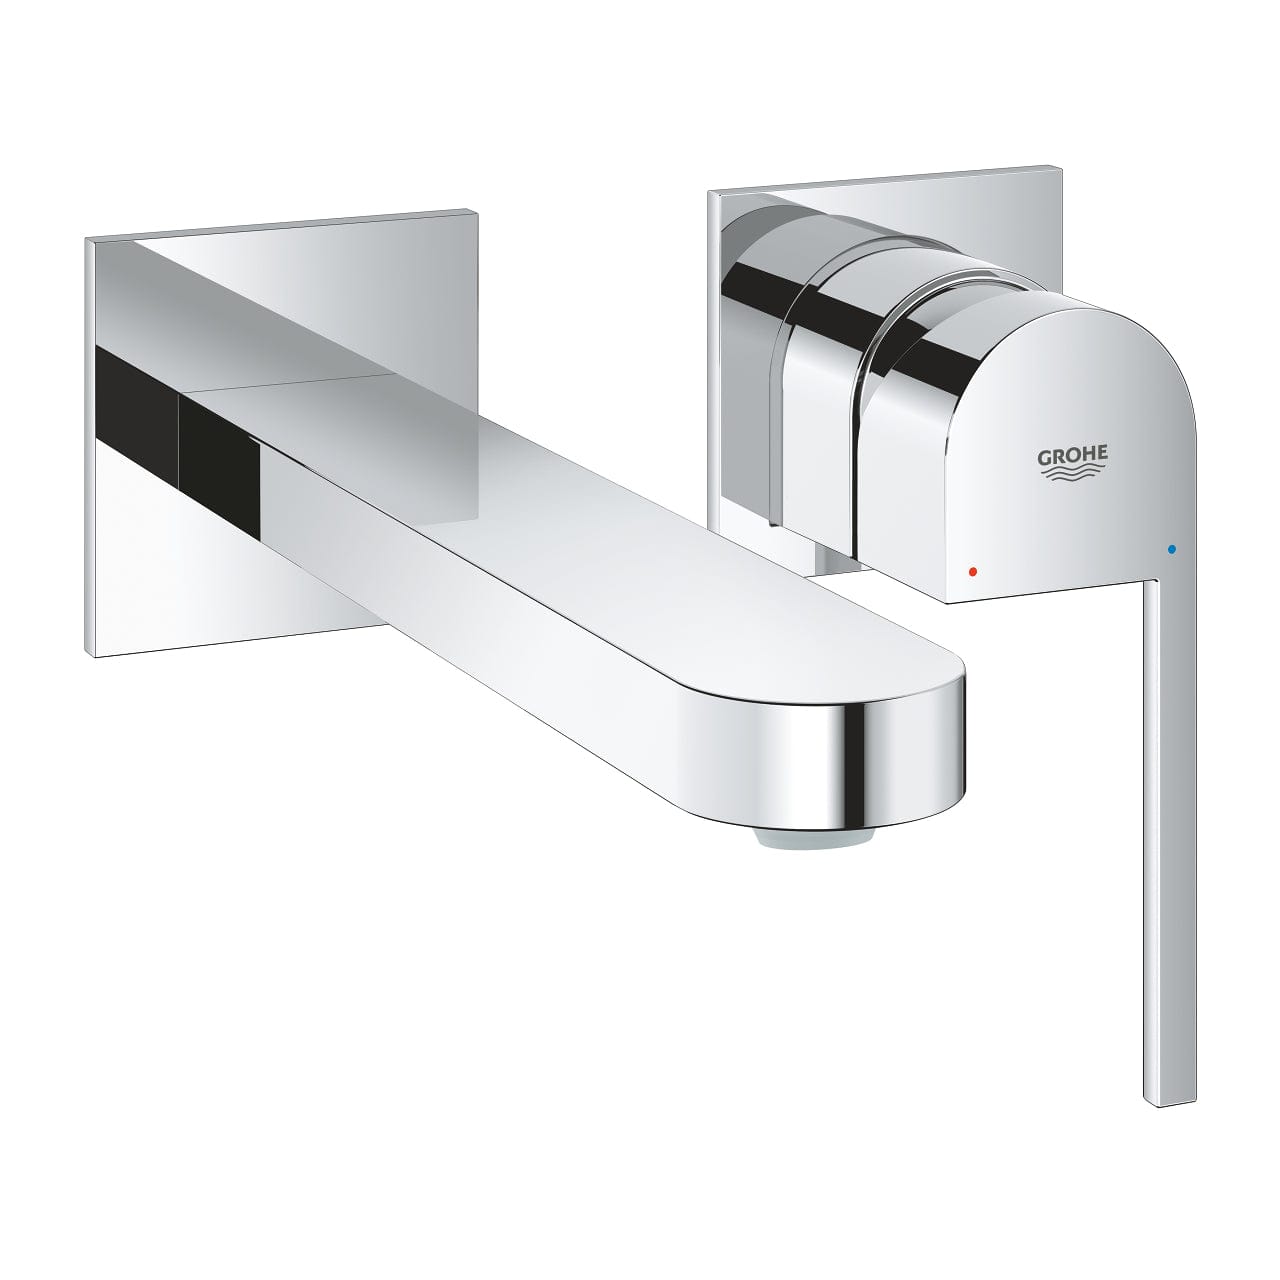 Grohe Plus Two-hole Basin Mixer L-Size, Chrome | Supply Master | Accra, Ghana Bathroom Faucet Buy Tools hardware Building materials